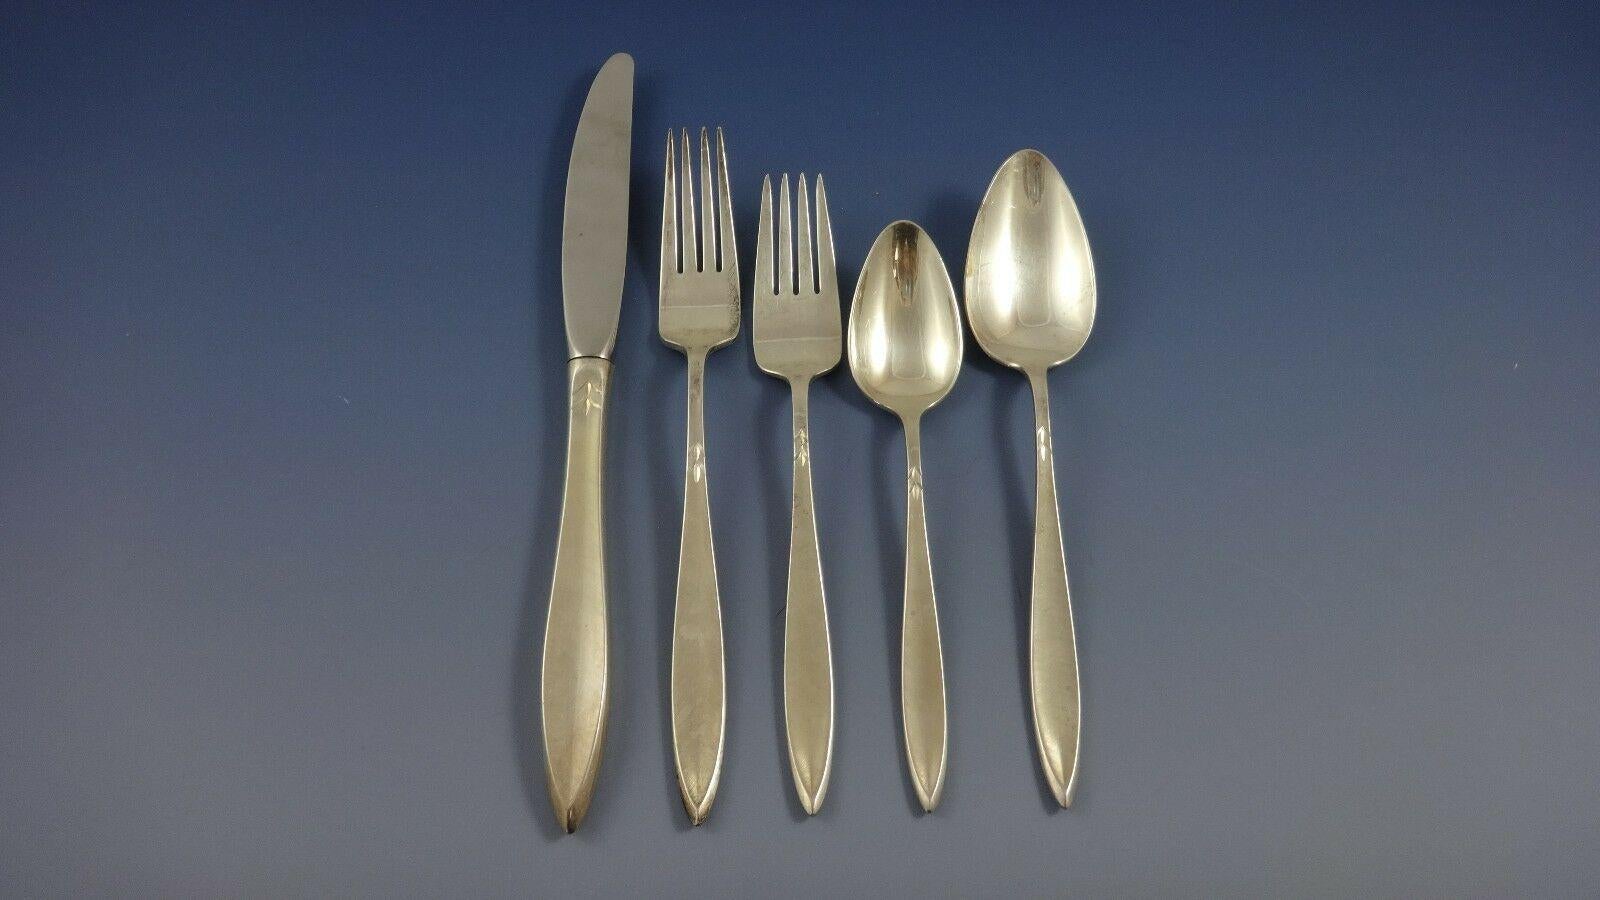 Simple and modern Gossamer by Gorham Sterling Silver flatware set - 70 pieces. This set includes:

12 knives, 8 7/8